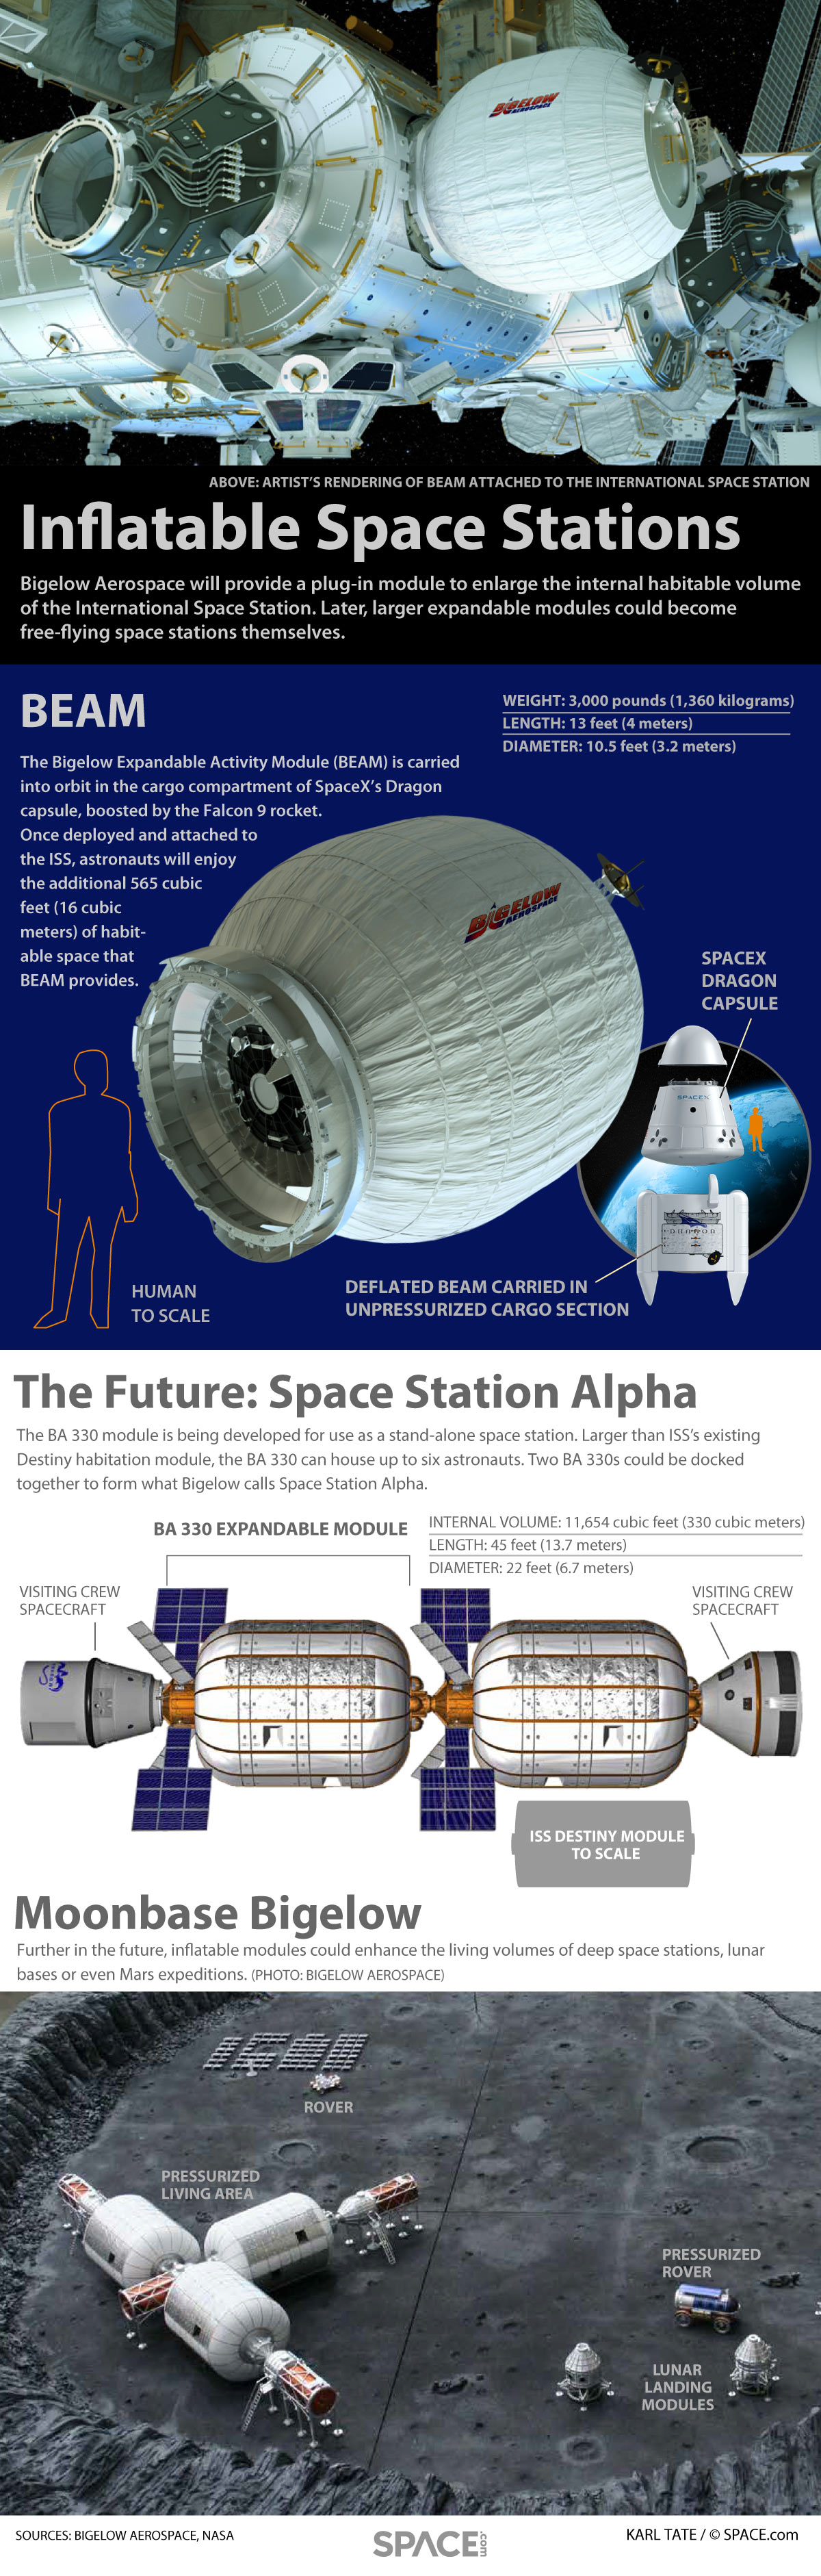 Infographic: Bigelow Aerospace's BEAM expandable module will enhance the living area of the International Space Station.